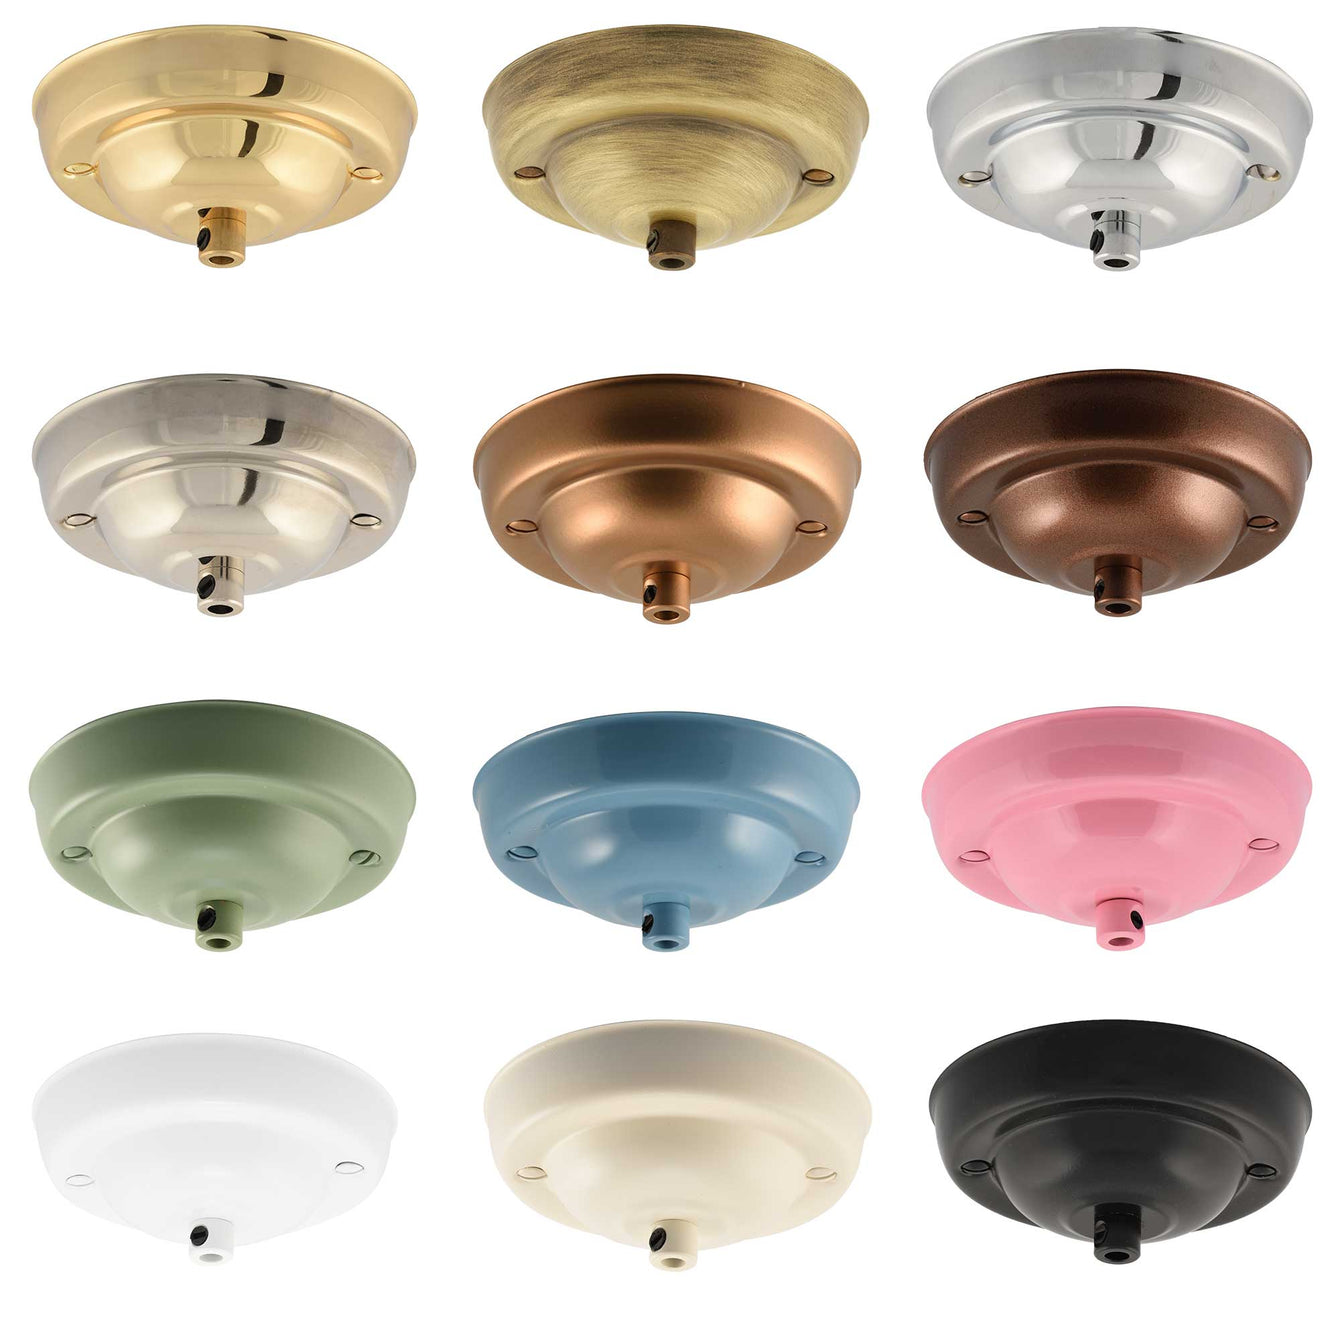 ElekTek 108mm Diameter Ceiling Rose with Cord Grip Metallic Finishes Powder Coated Colours For Light Fittings and Chandeliers Brass